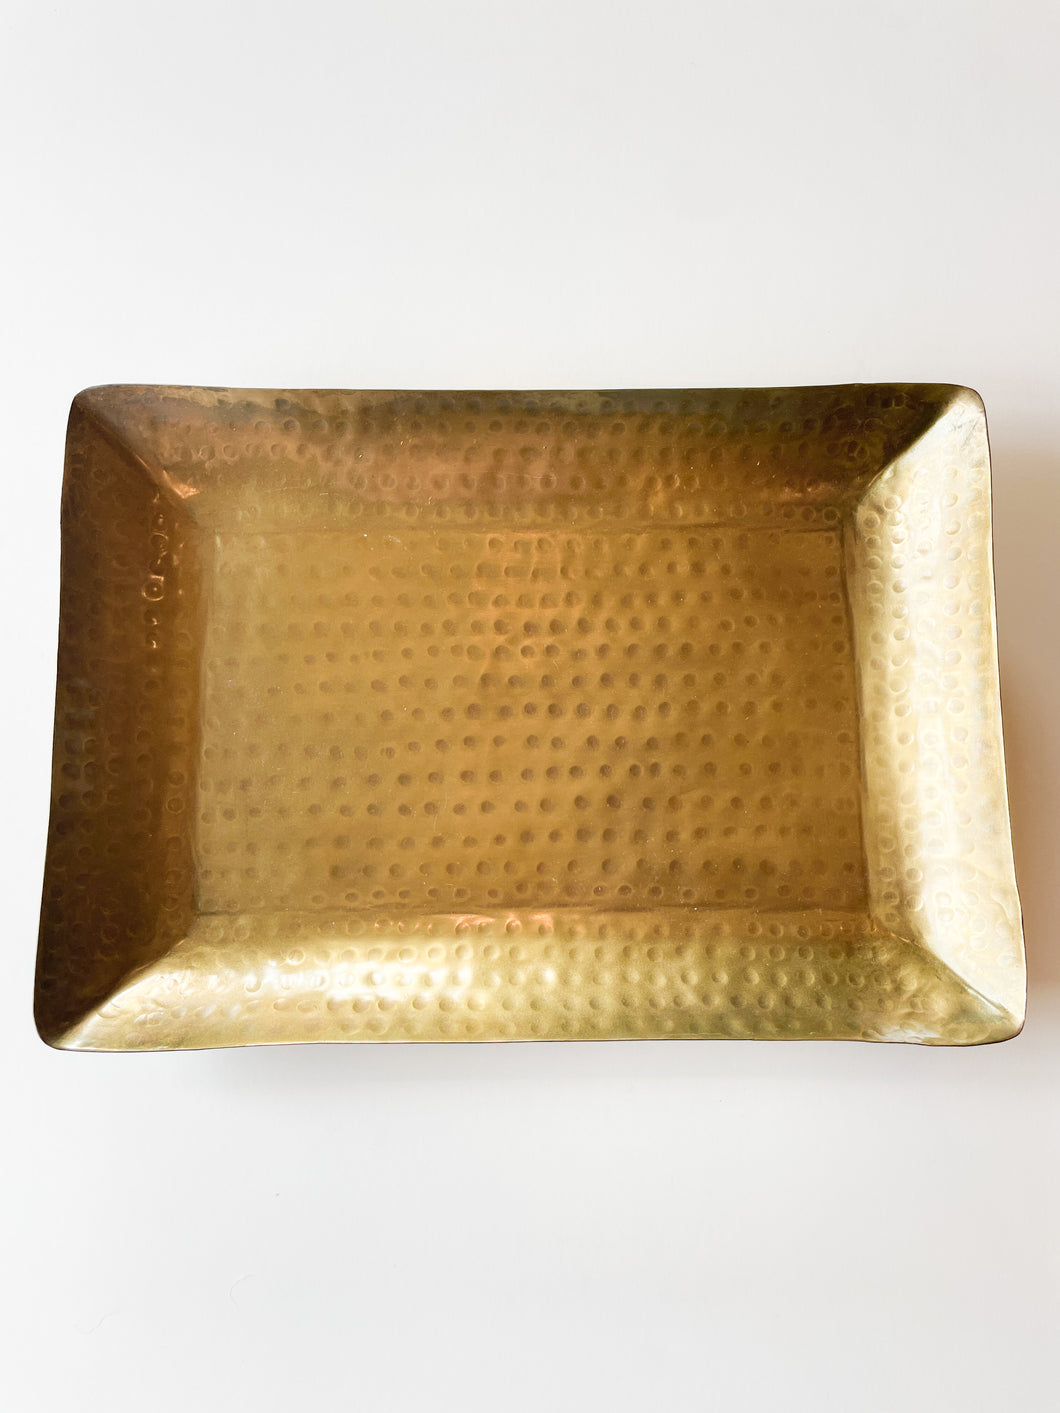 Hammered Metal Tray Antique Brass Finish